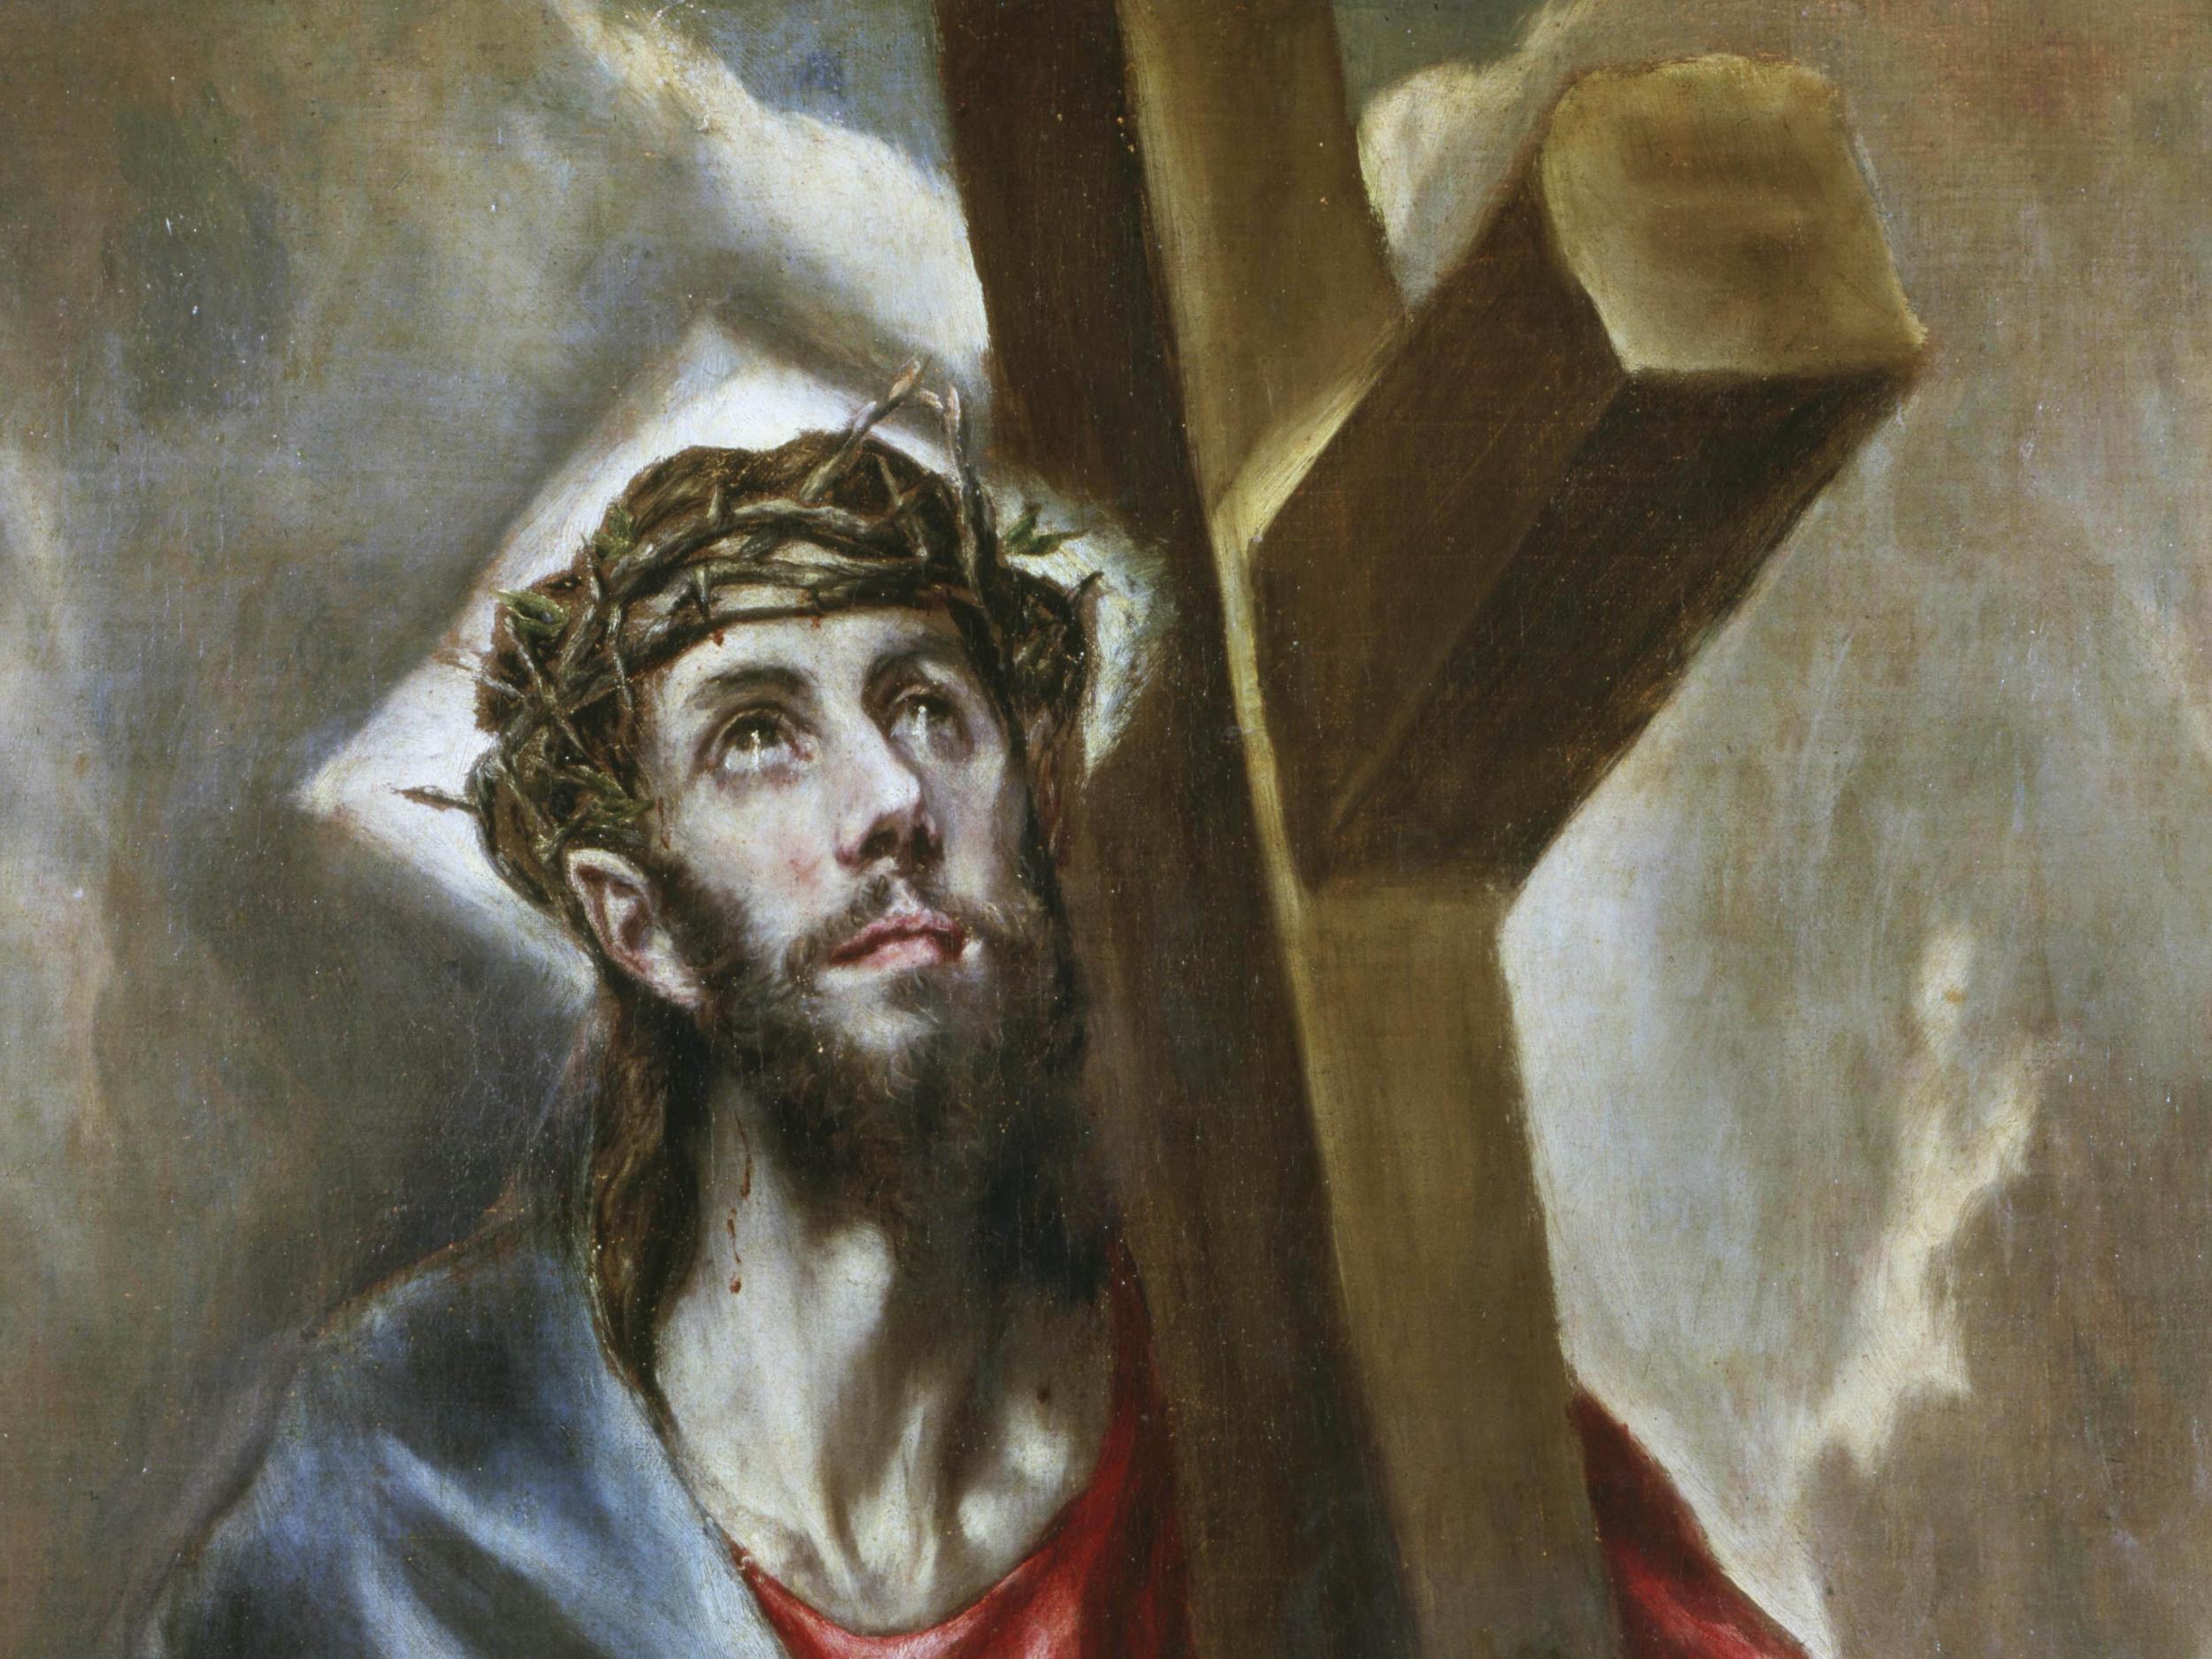 Christ Carrying The Cross by El Greco